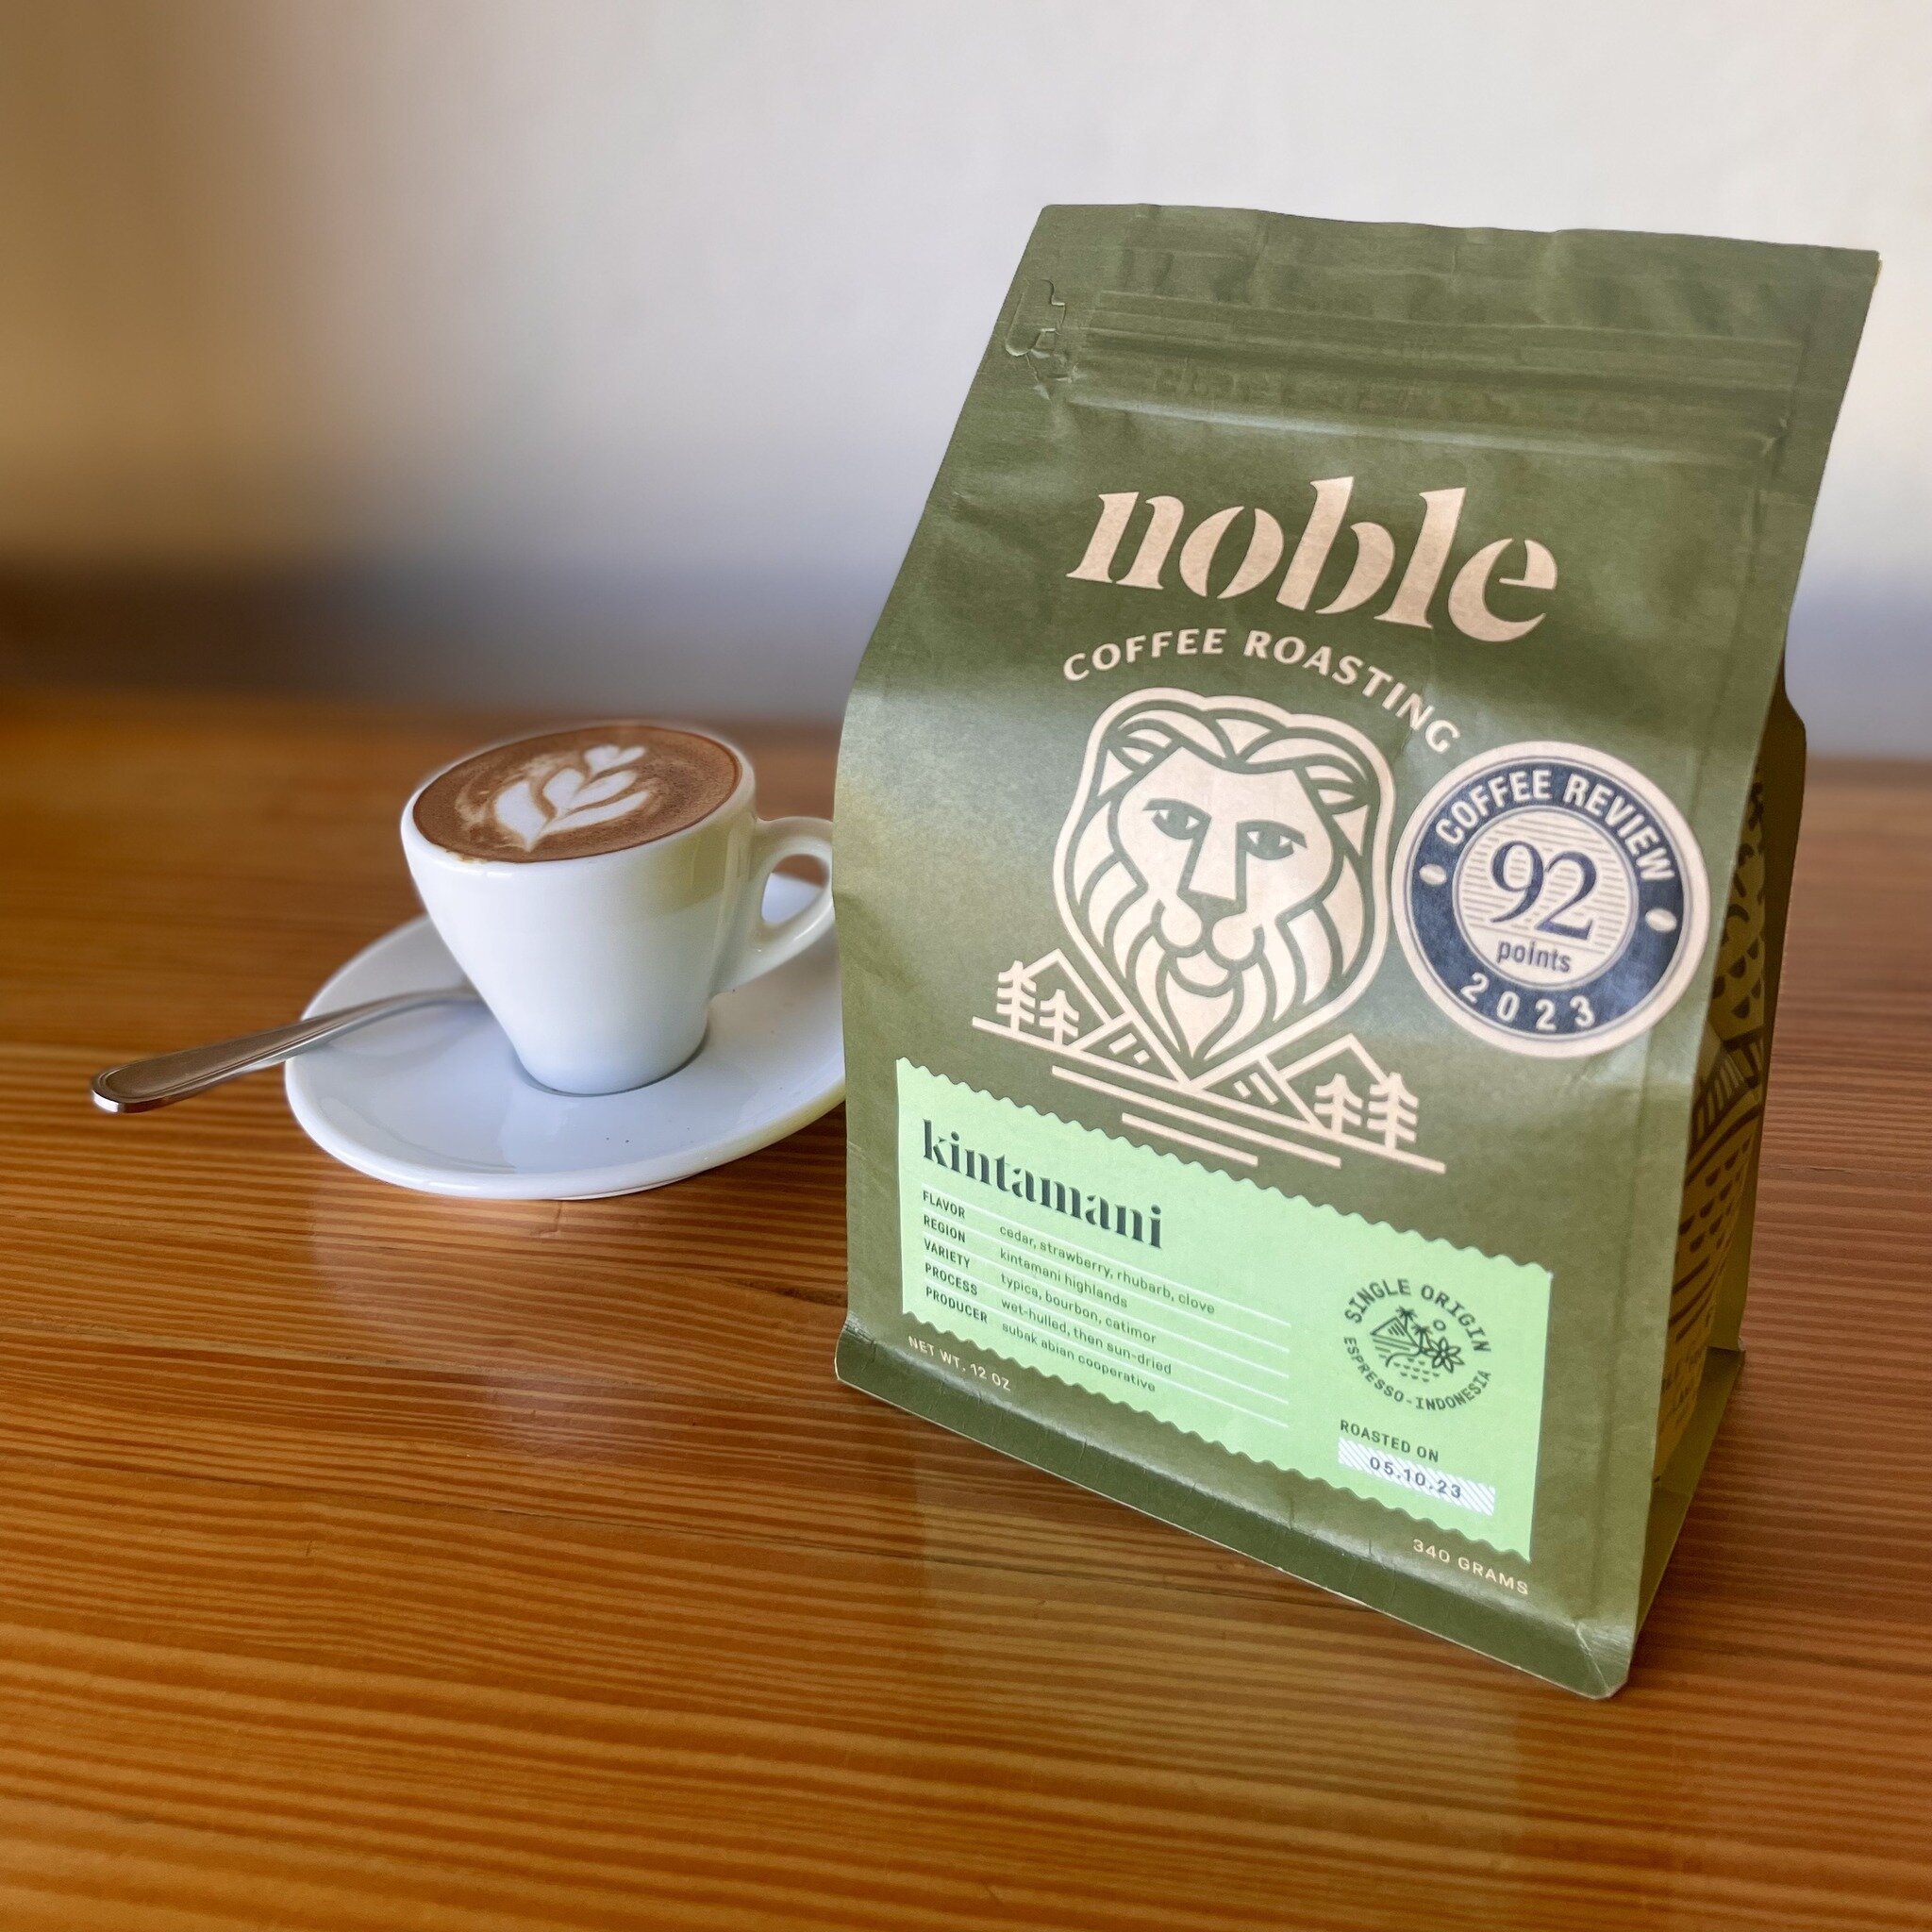 Coffee Review just scored our new single origin espresso at 92 points! Balinese &lsquo;Kintamani&rsquo; is a unique and delicious espresso. With flavor notes of strawberry, rhubarb, clove, and cedar - Balinese &lsquo;Kintamani&rsquo; has a big body, 